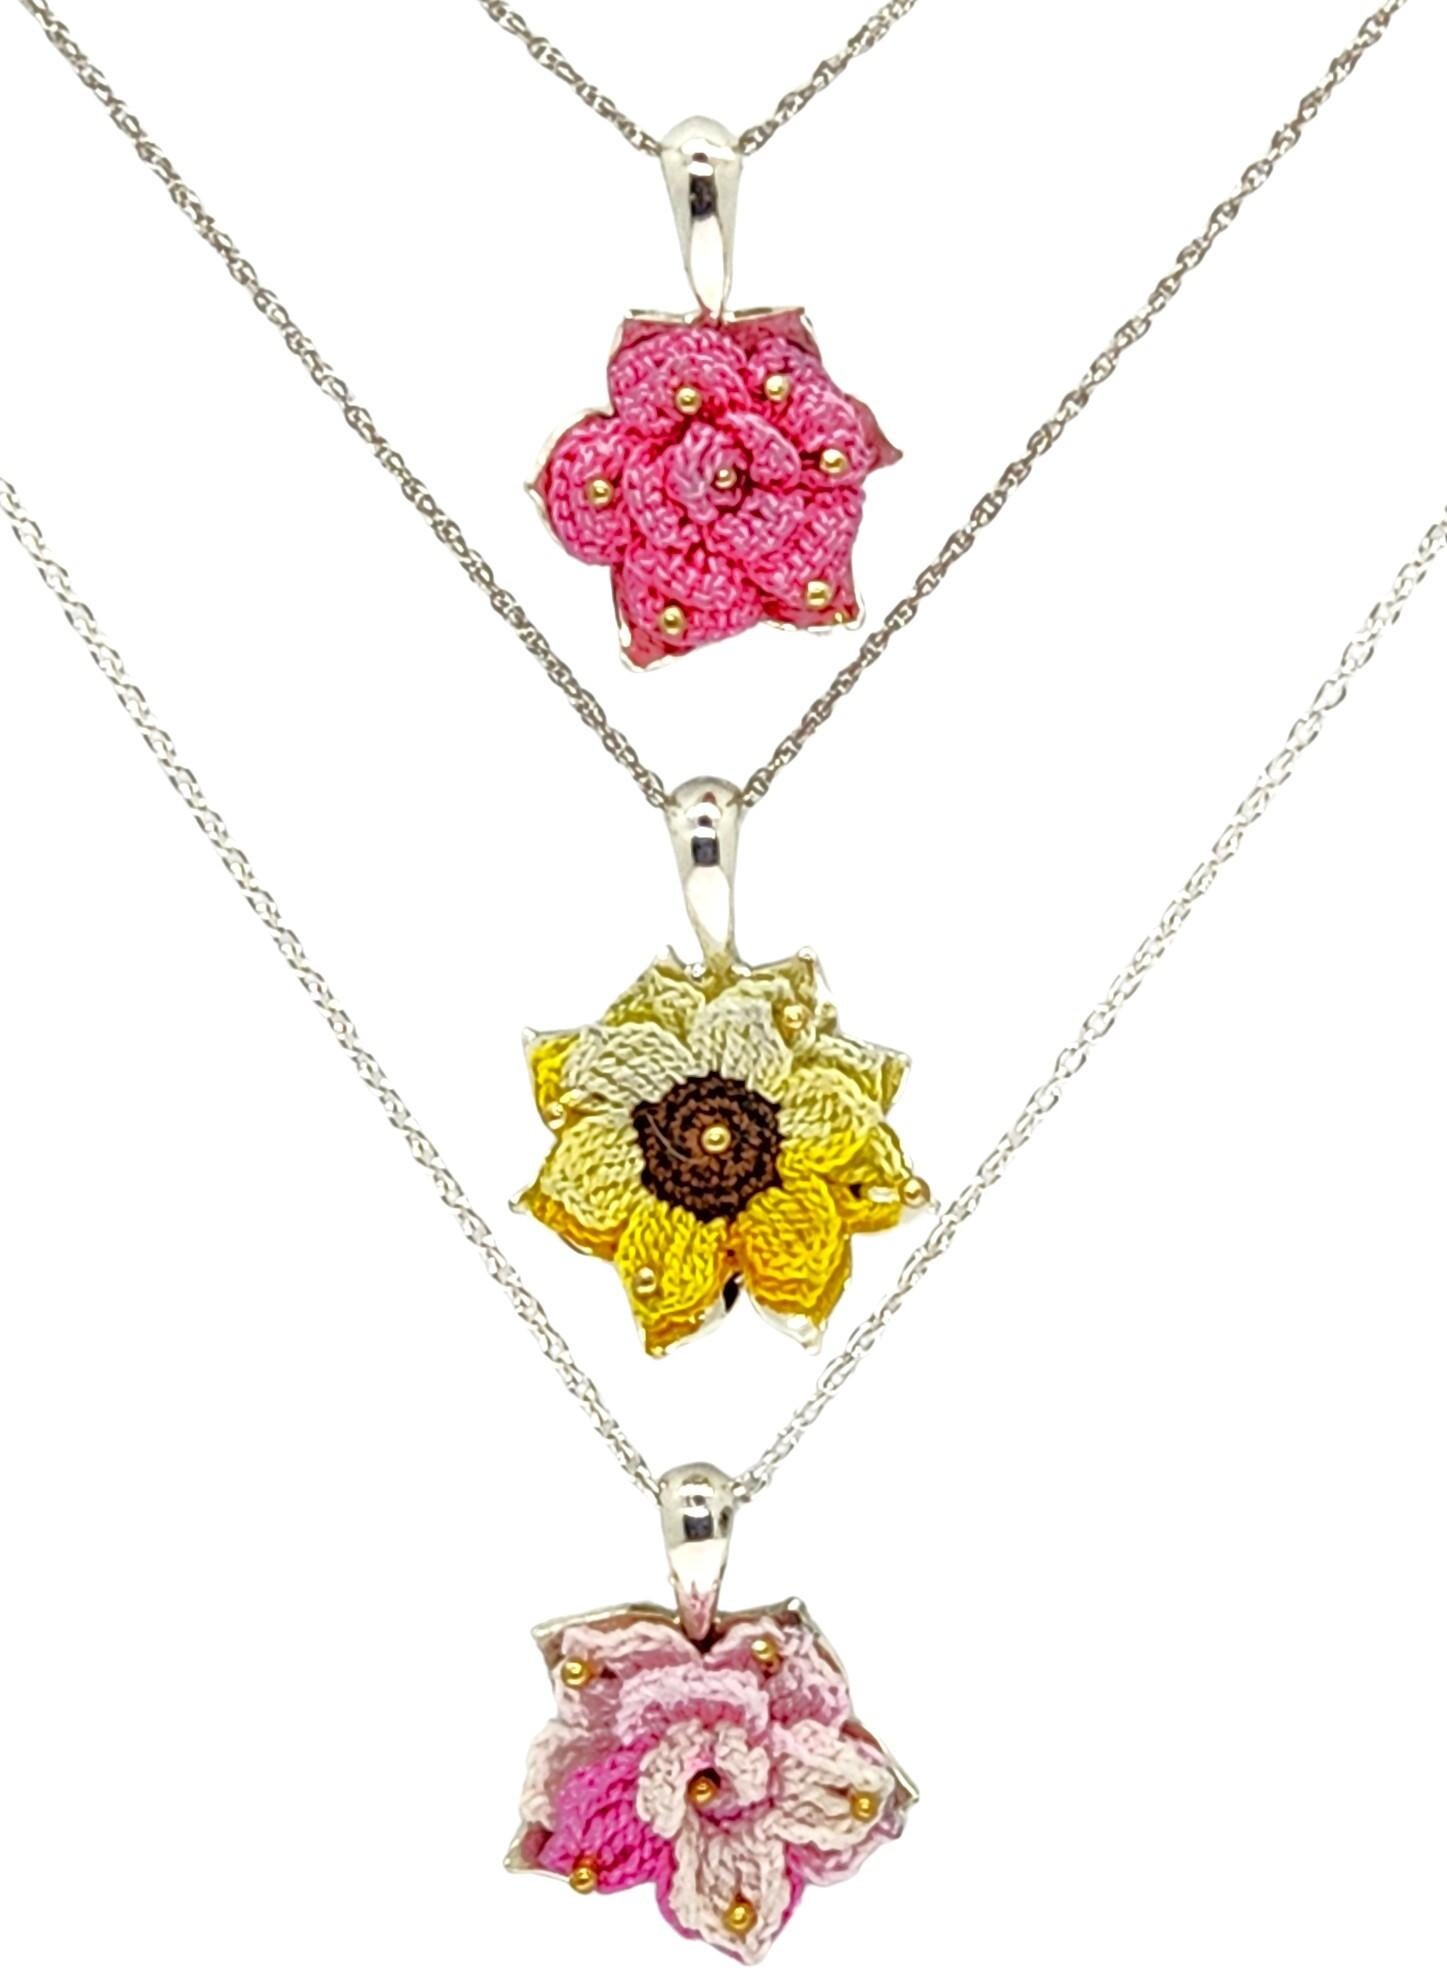 Artisan Hand Knit Flower Necklace in Handmade Sterling Silver and 14KY Gold Setting #2 For Sale